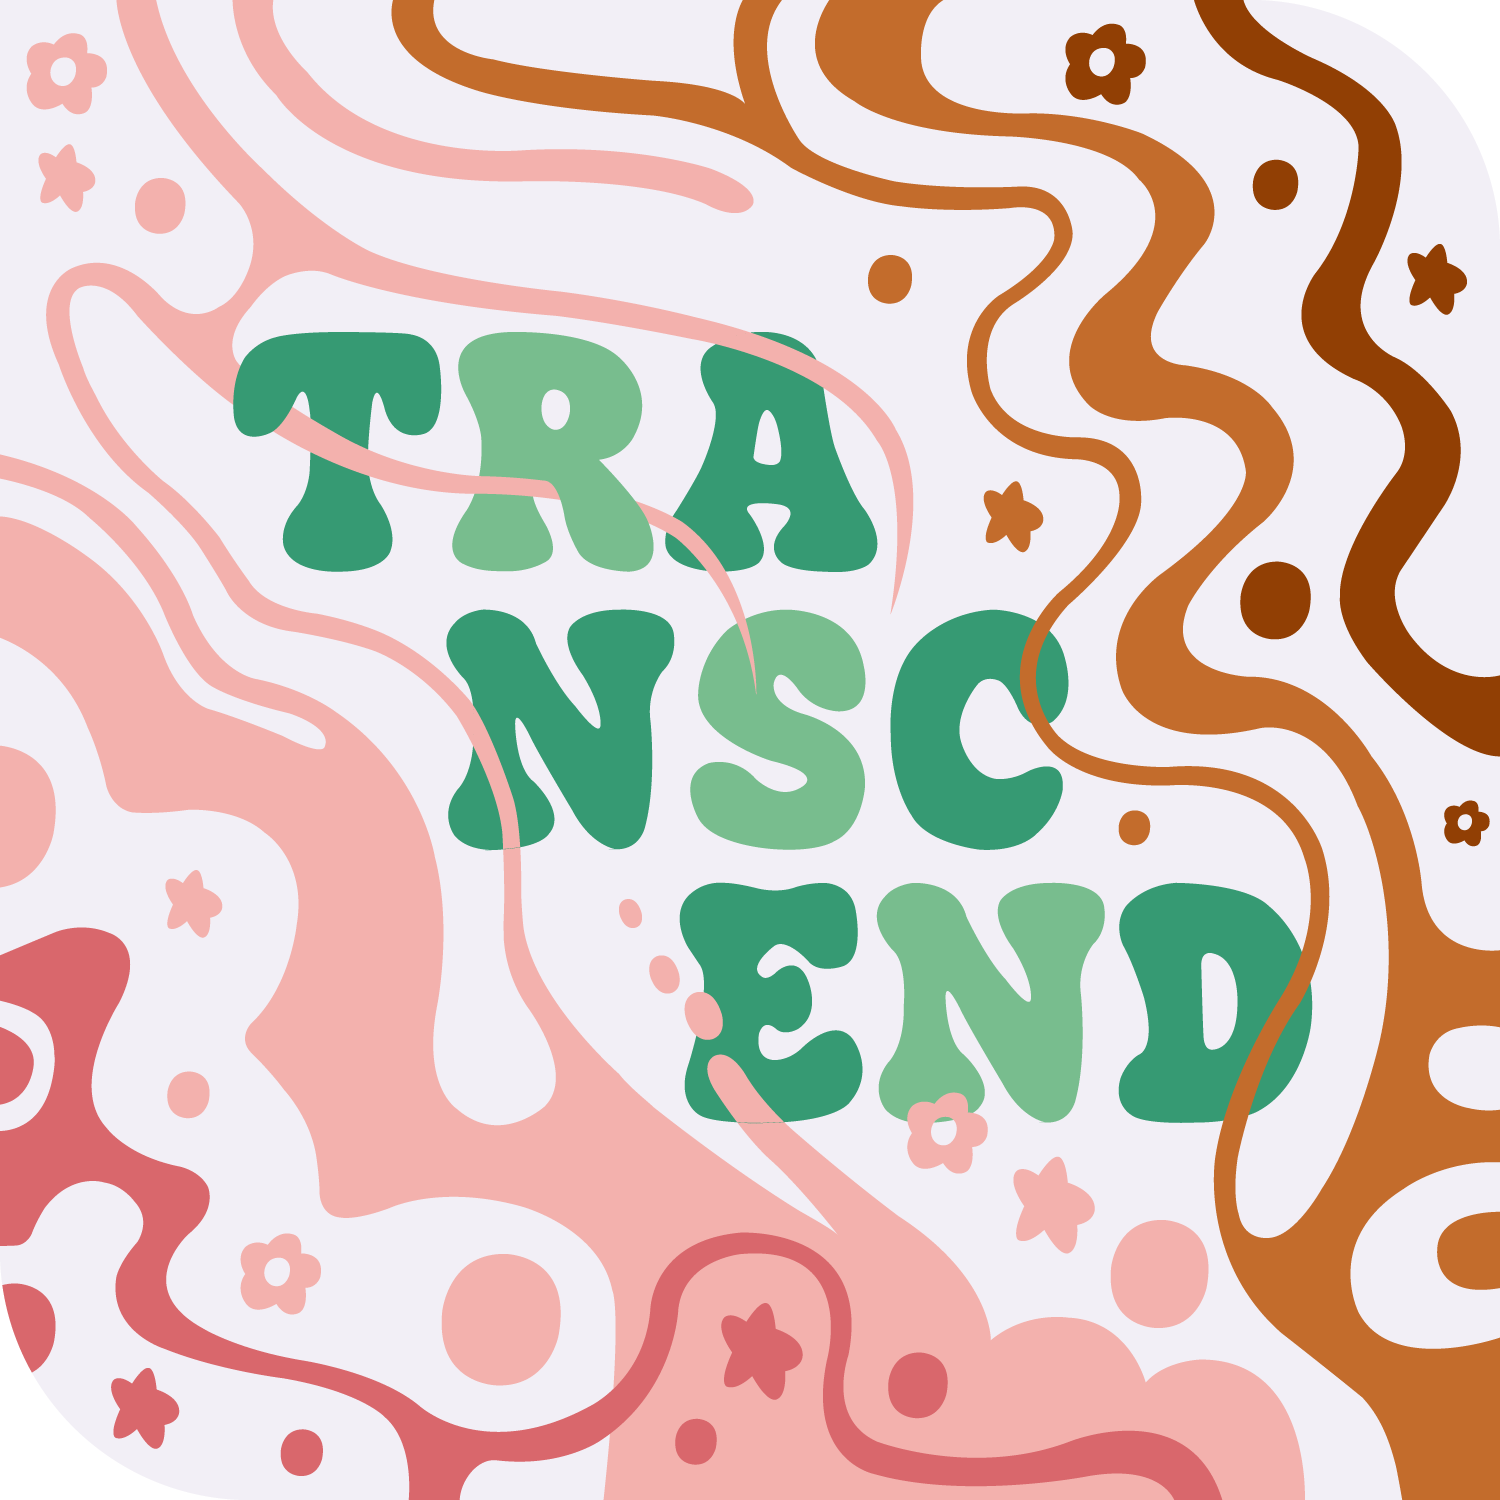 Transcend music posters